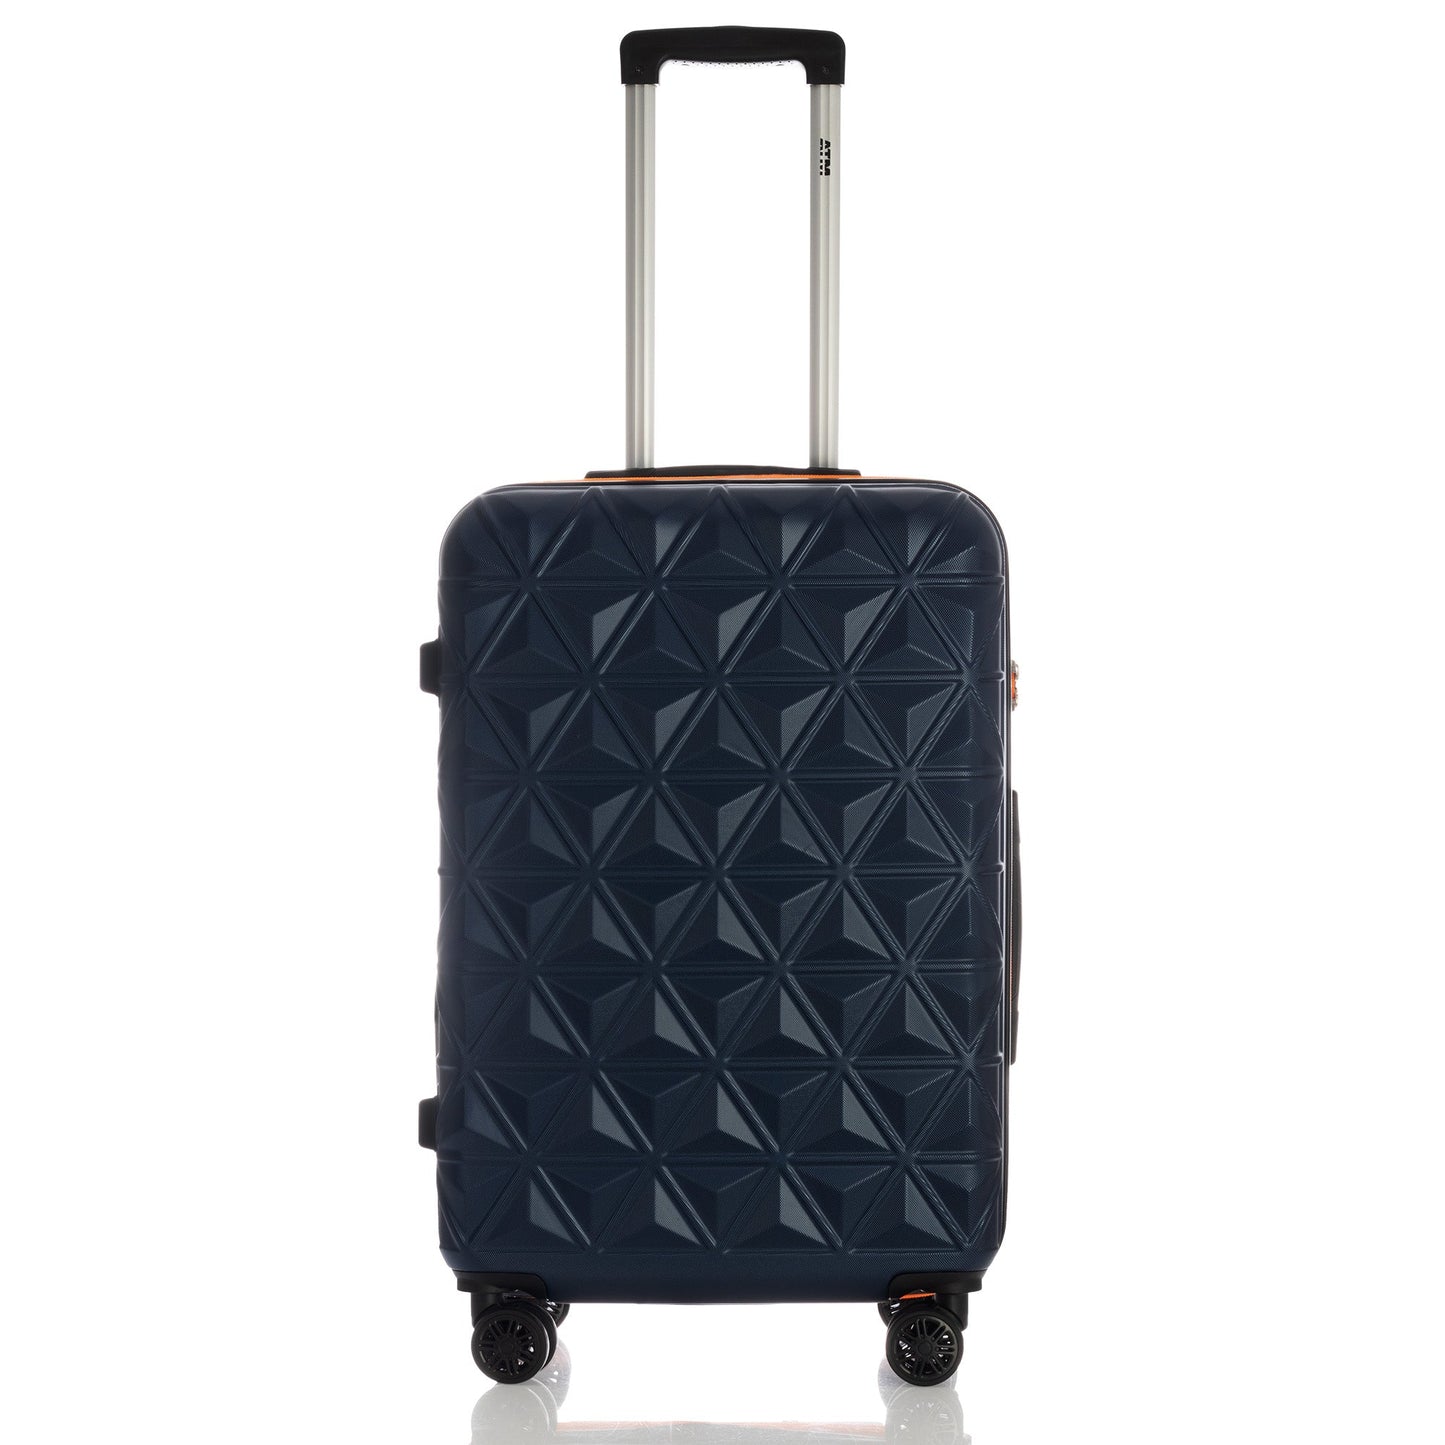 Cosmos Collection Navy Luggage (21/25/29") Suitcase Lock Spinner Hardshell